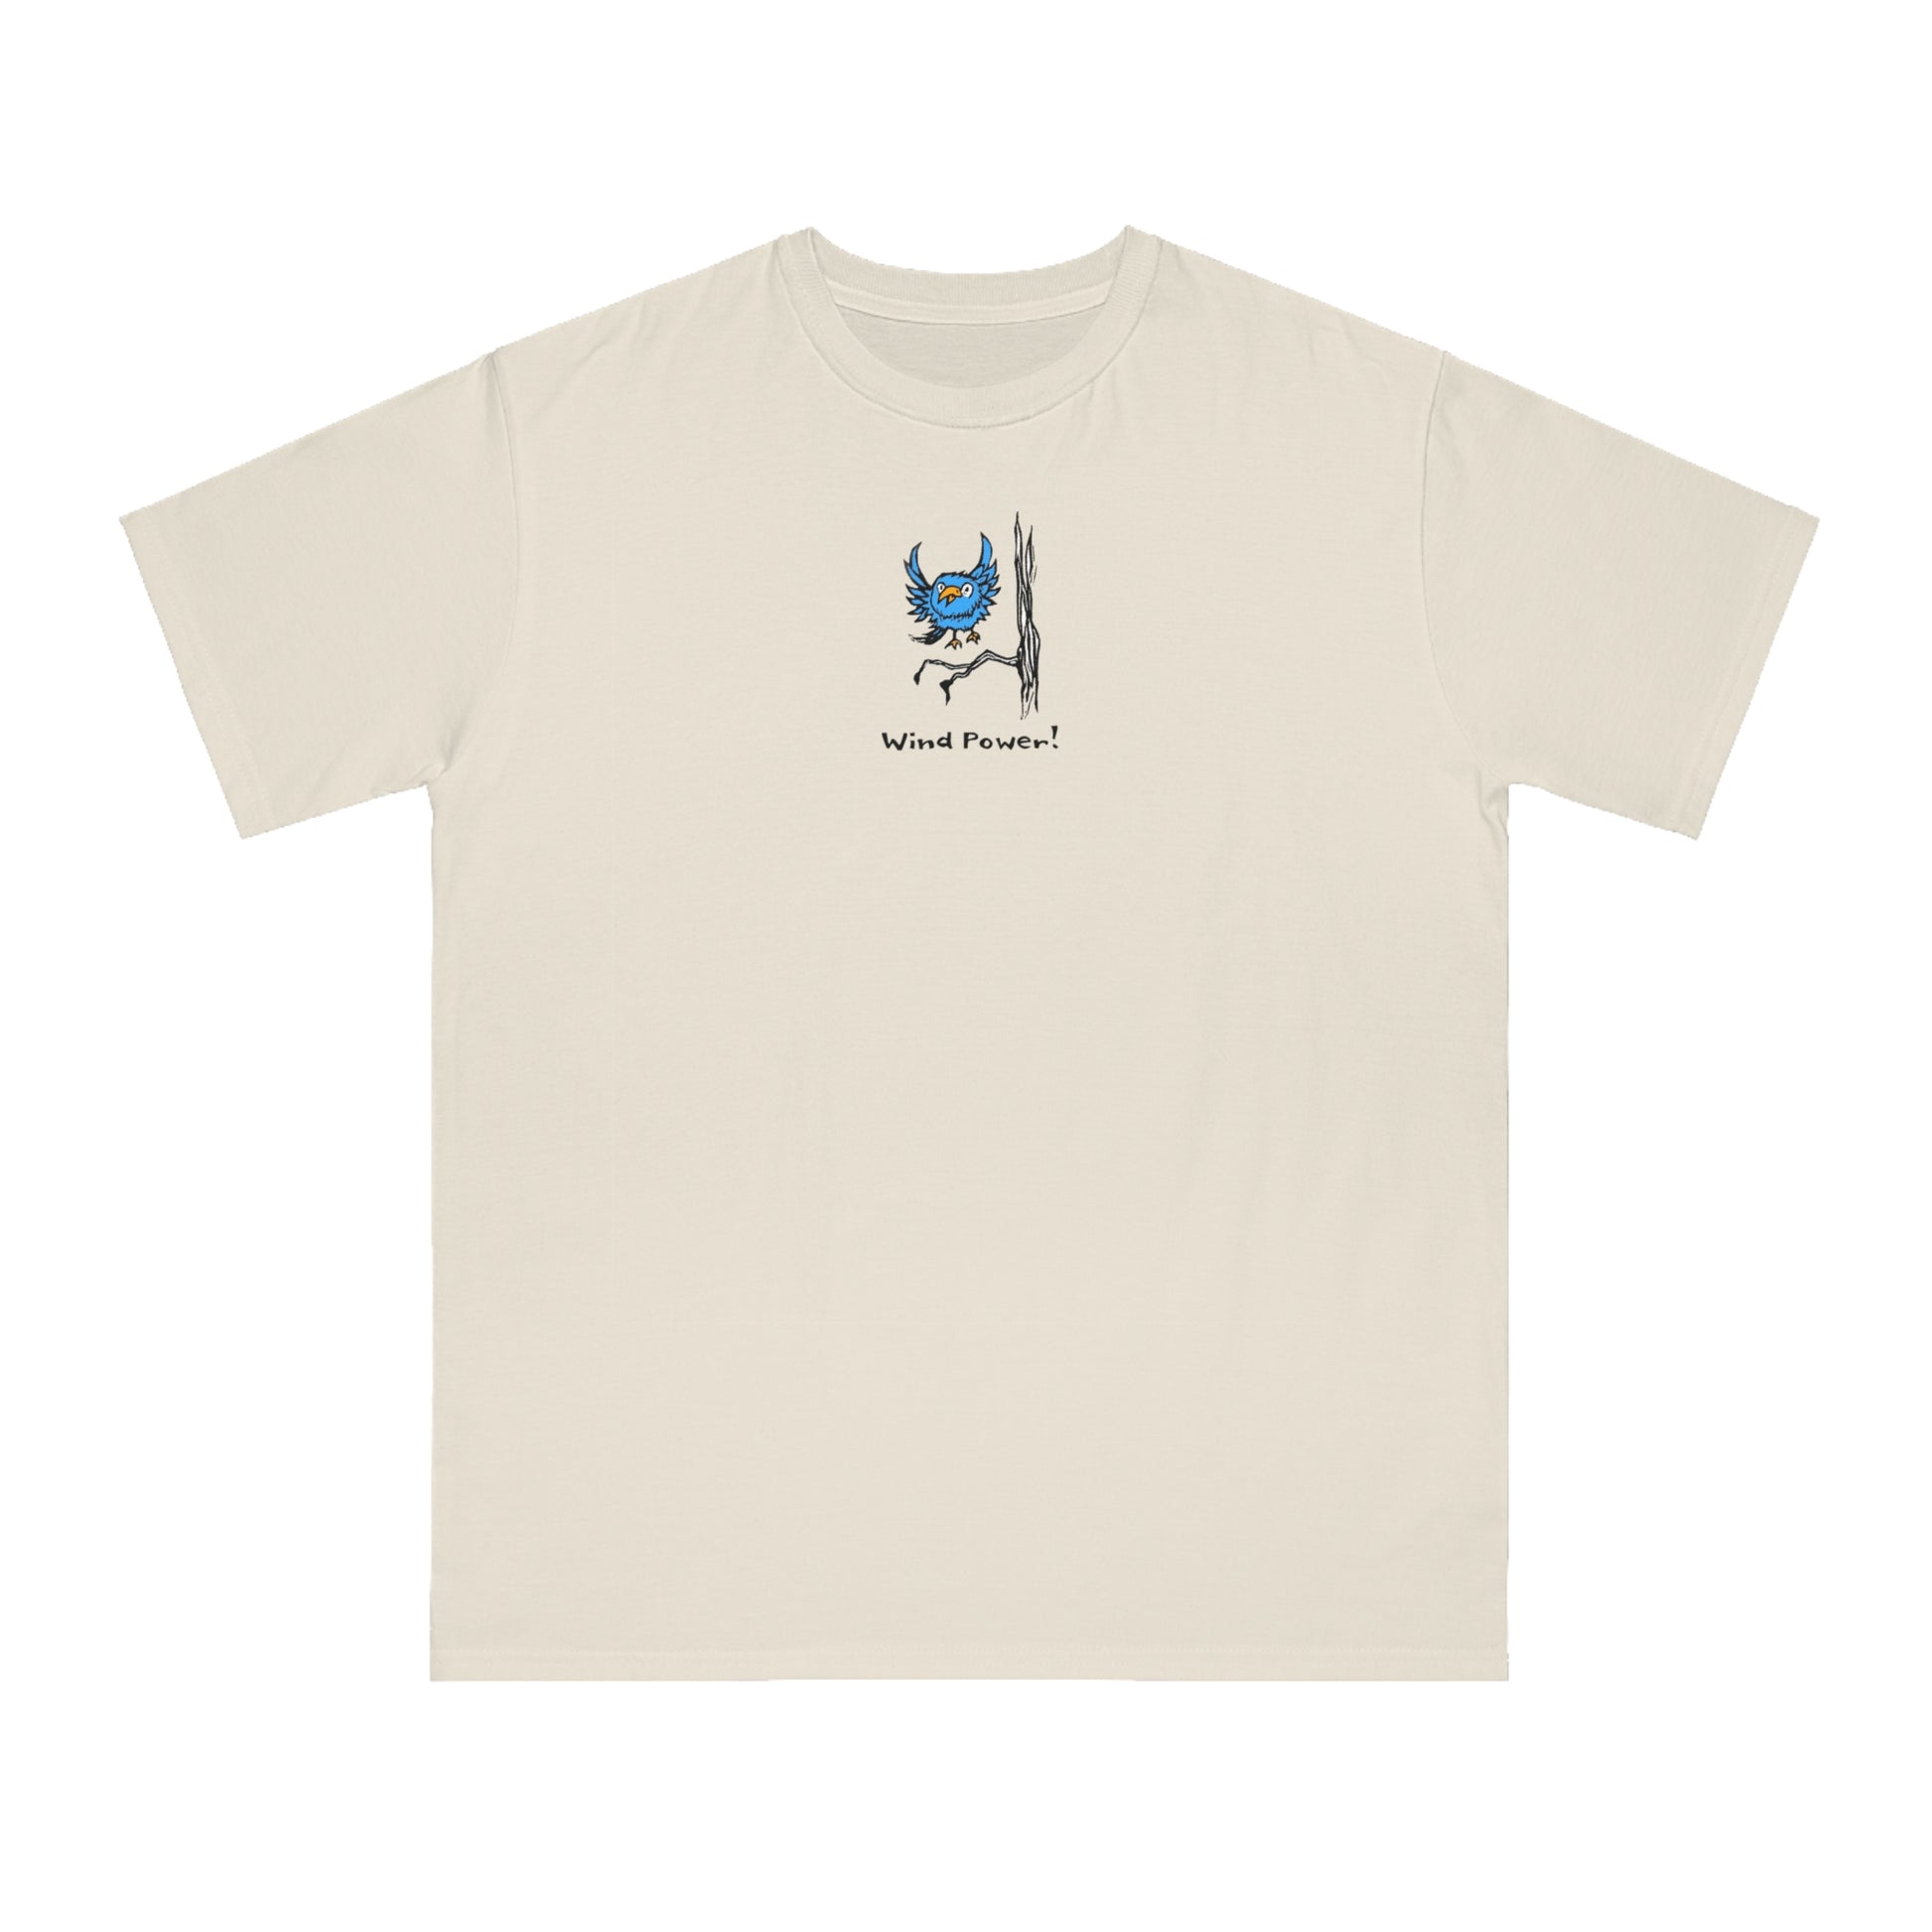 Blue bird with orange beak flying over branch on tree on dolphin blue tint color unisex men's t-shirt. Text under it reads Wind Power